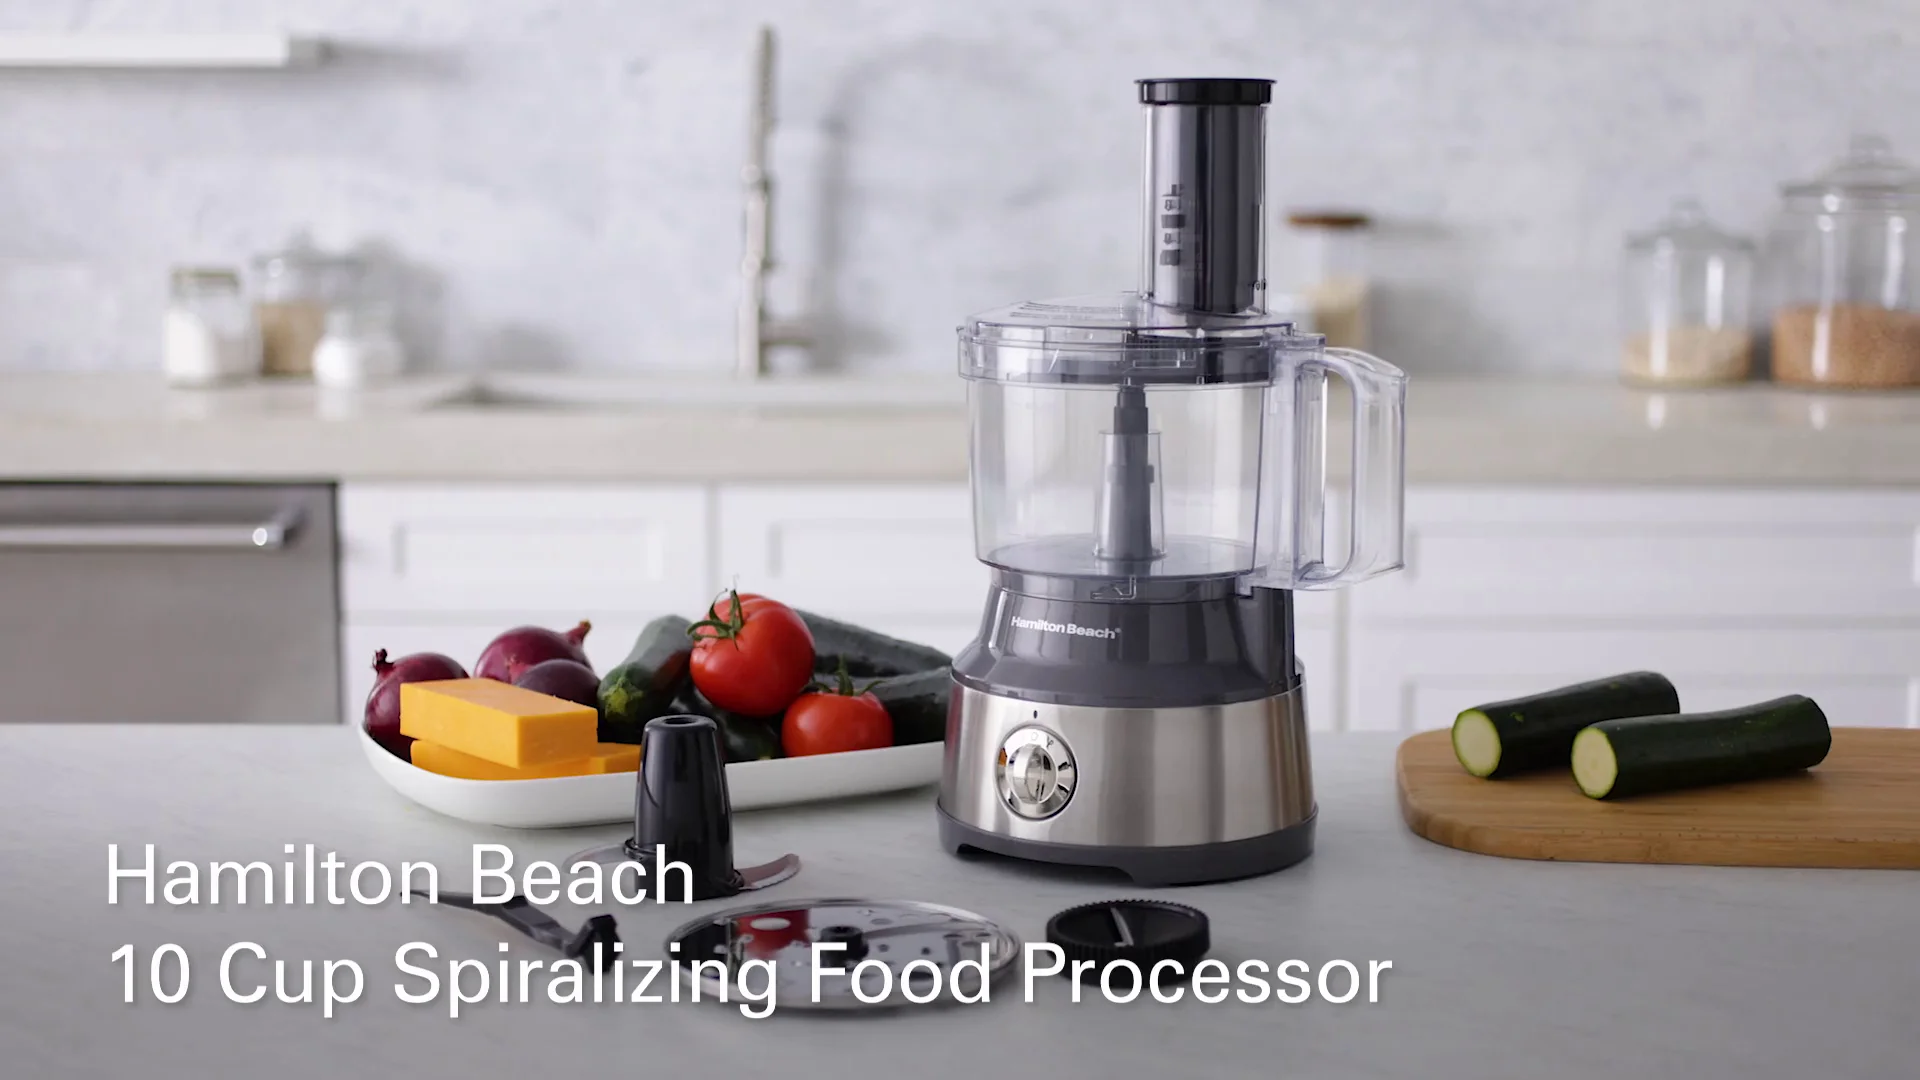 Hamilton Beach Food Processor & Vegetable Chopper for Slicing, Shredding,  Mincing, and Puree, 10 Cups + Easy Clean Bowl Scraper, Stainless Steel  (70730)